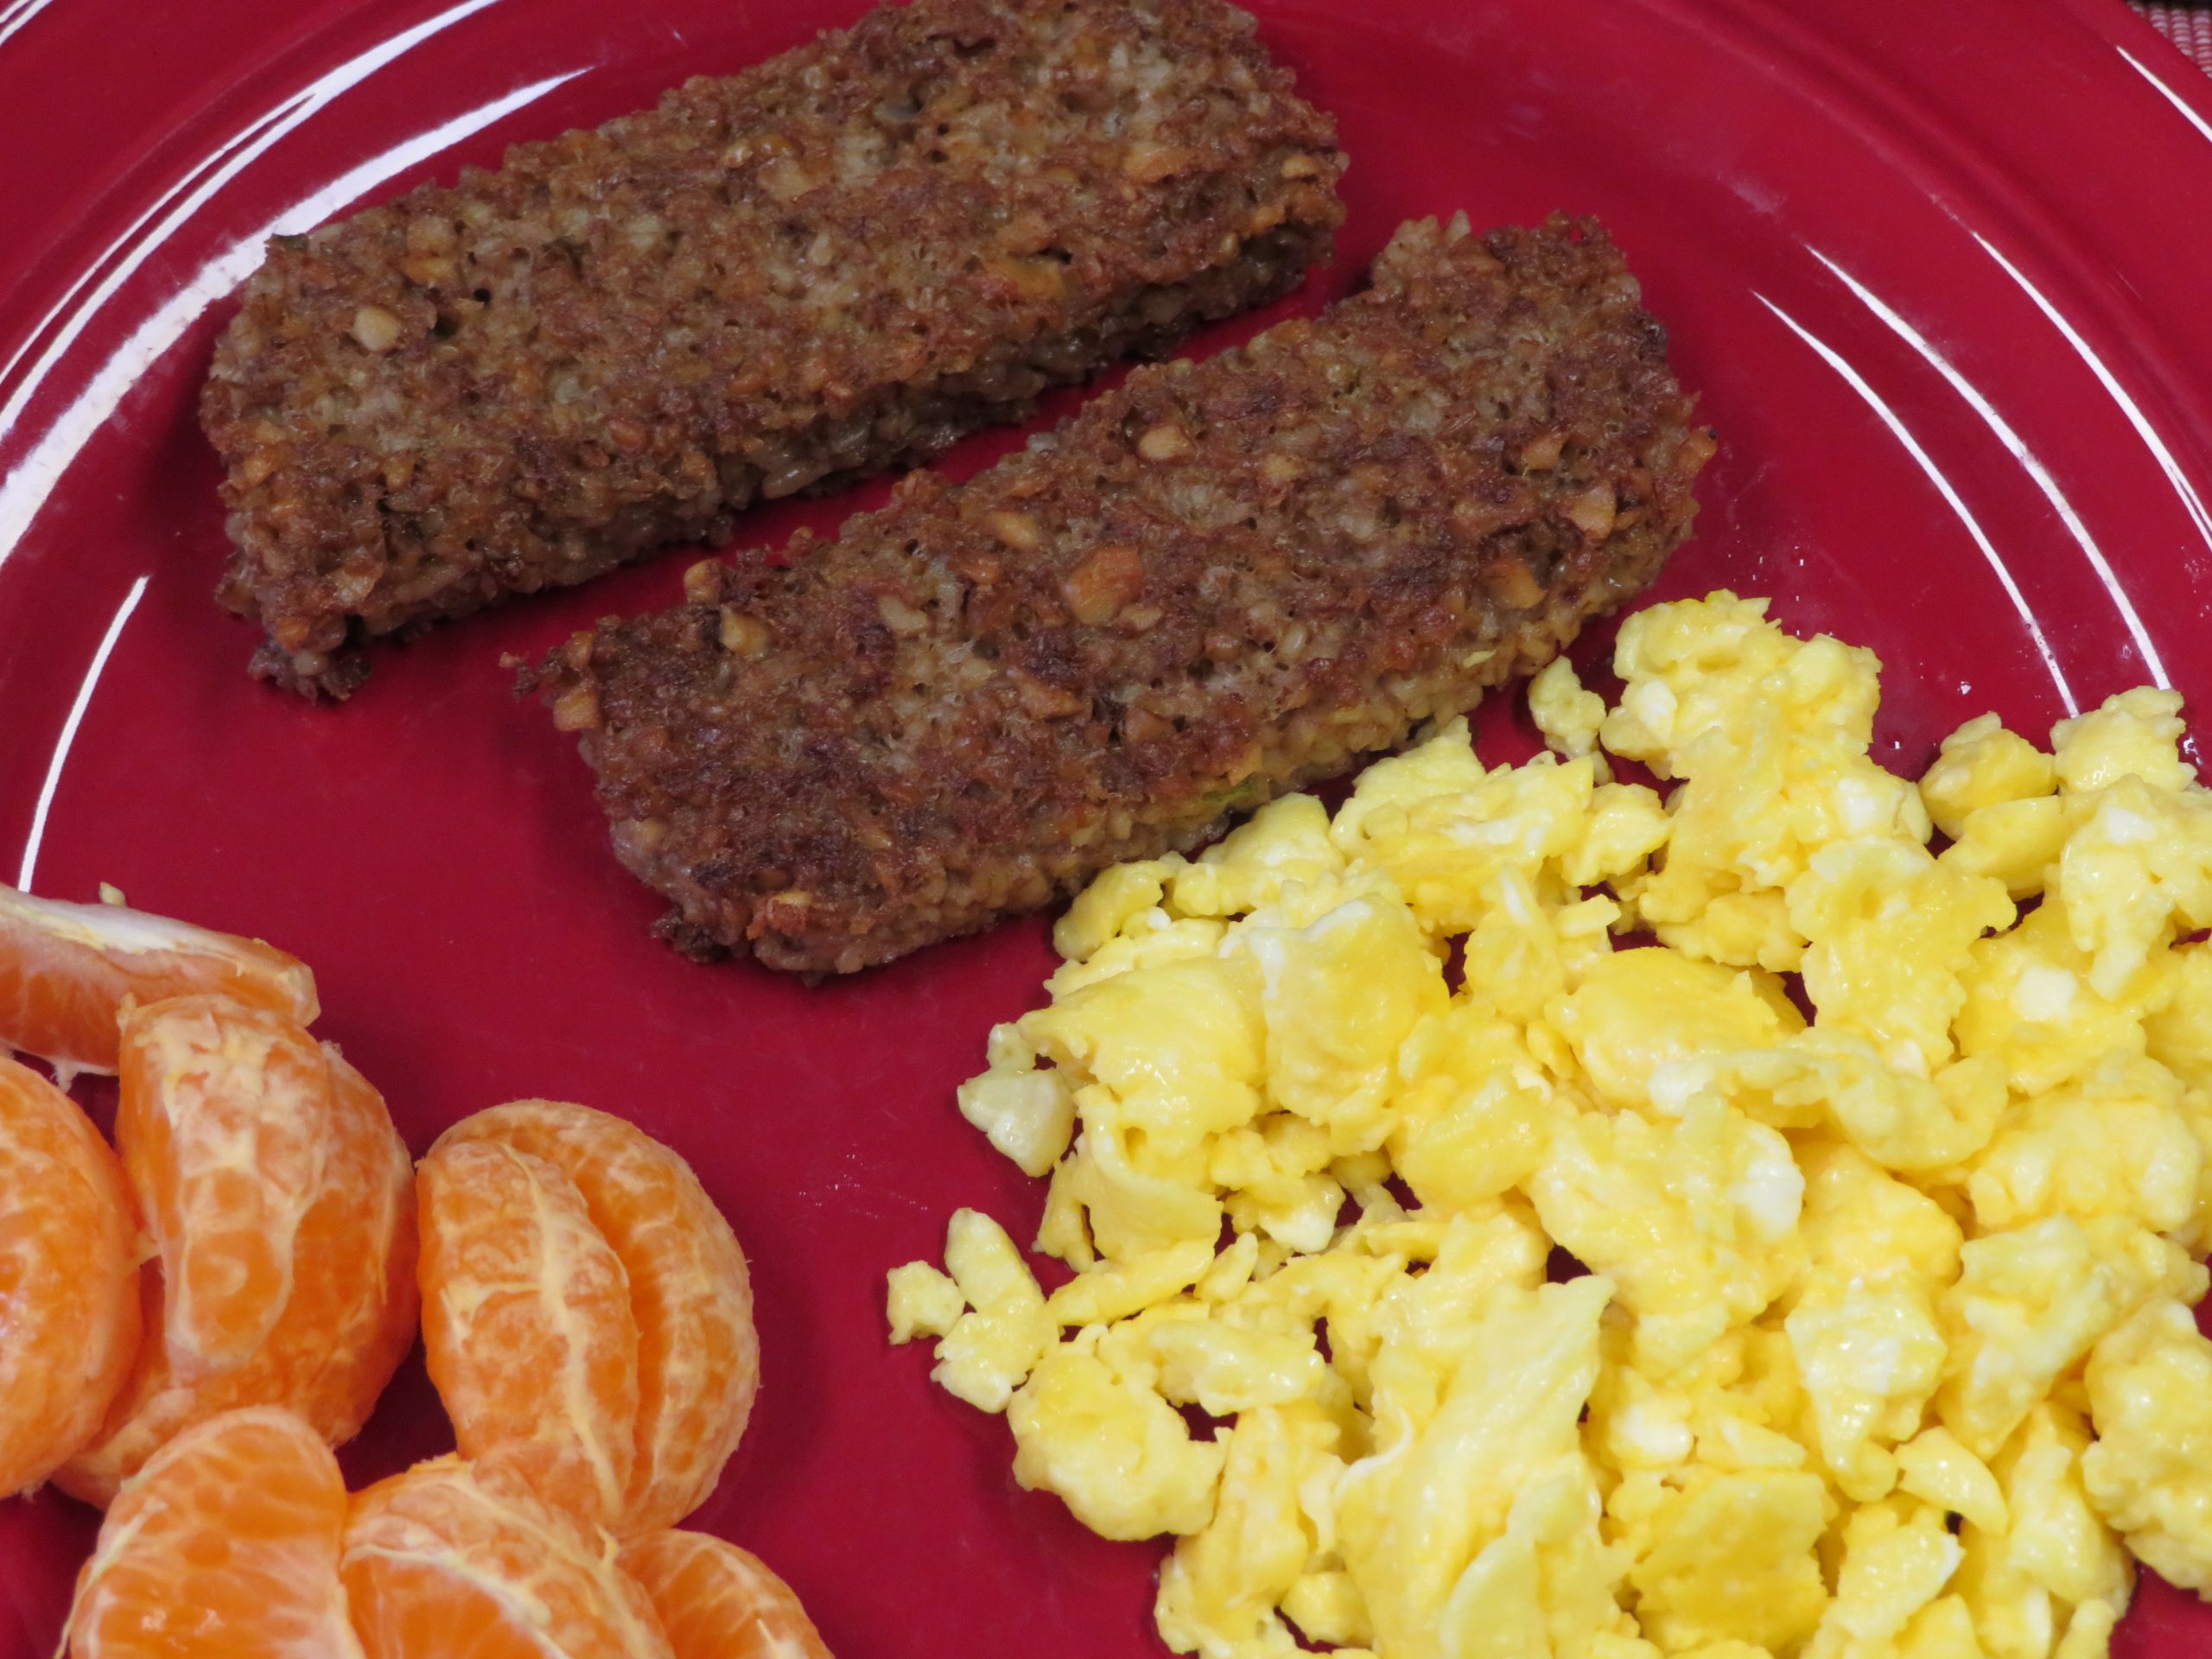 Walnut and oat sausage on a plate with scrambled eggs and oranges